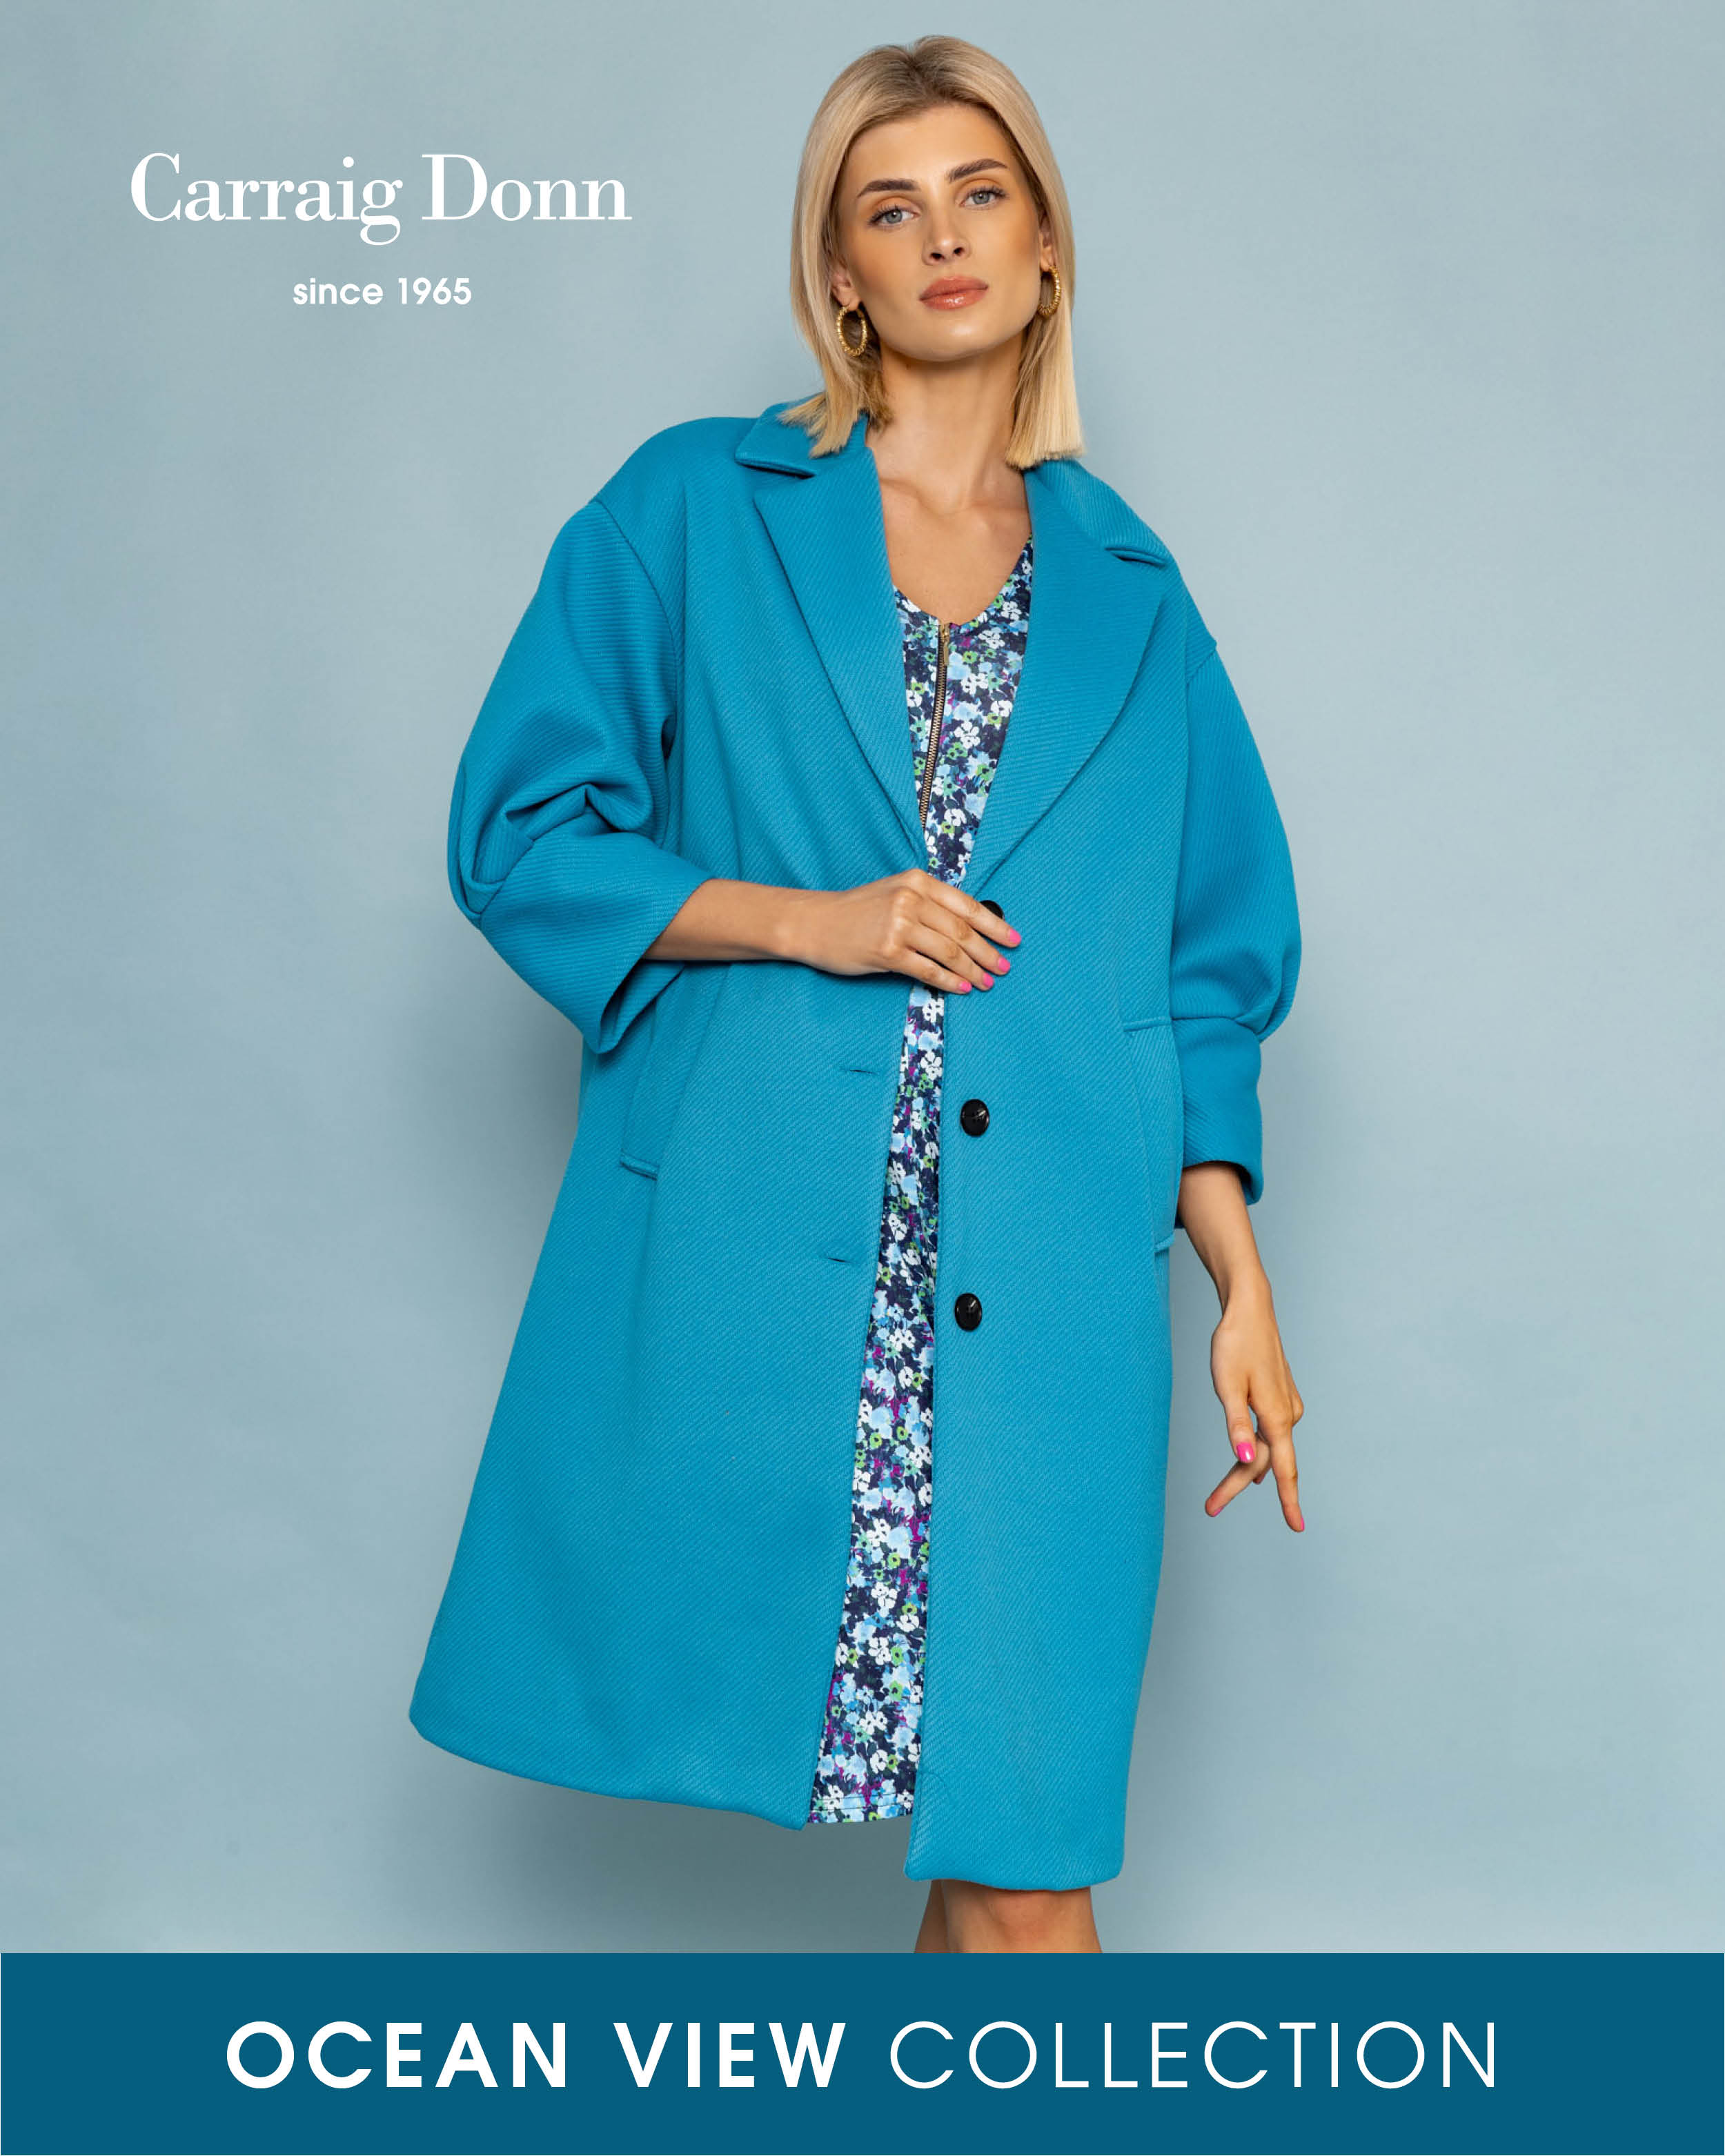 Carraig Donn’s ‘Ocean View’ Collection is HERE!